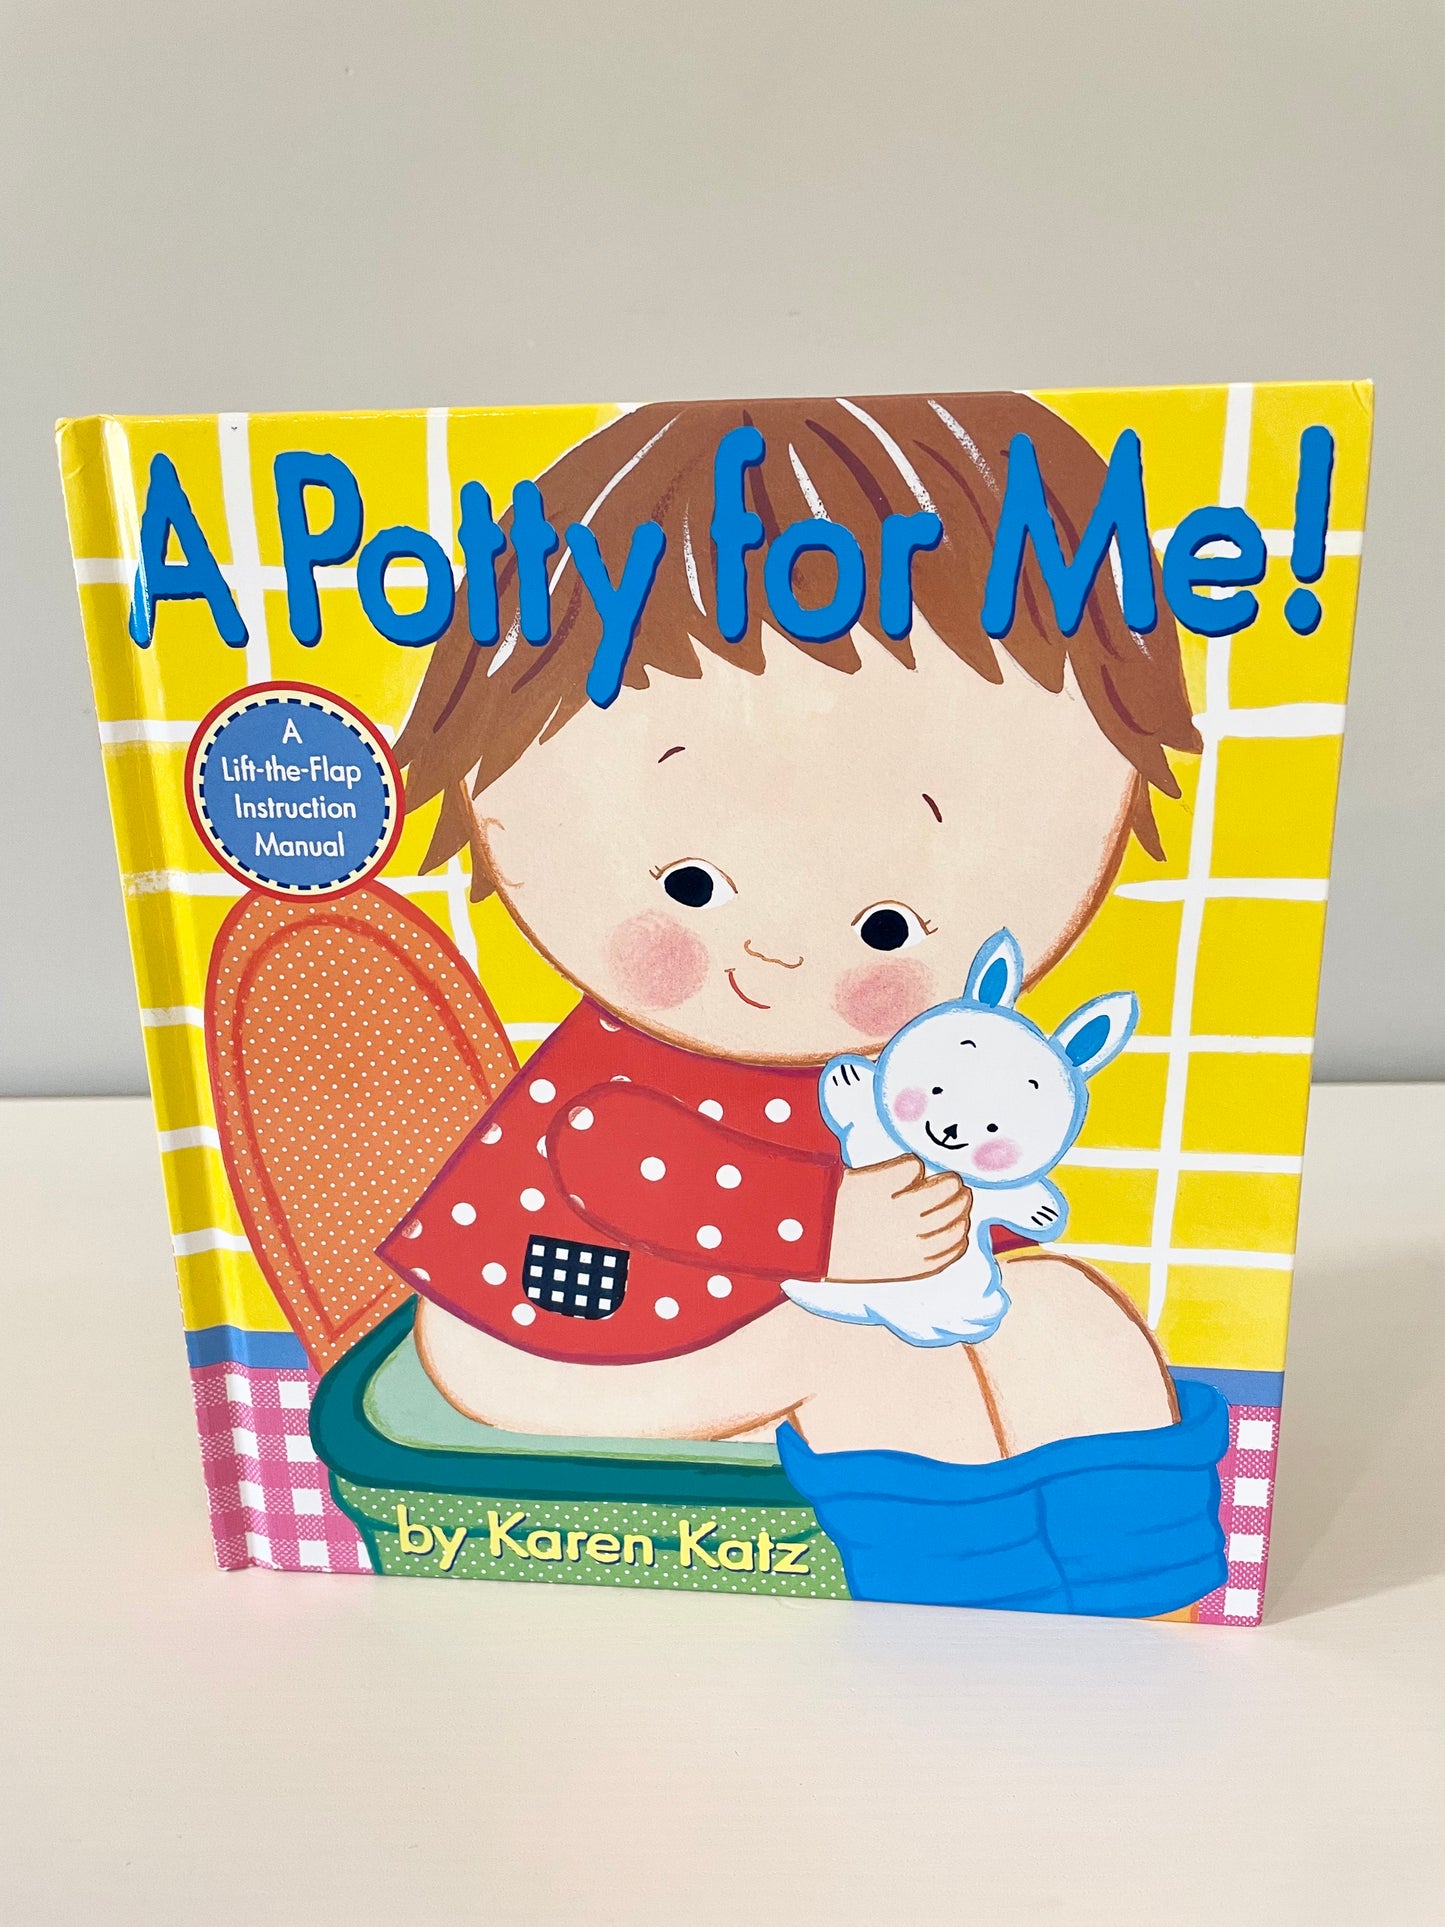 A Potty for Me! Hardcover Book / 1-4 years